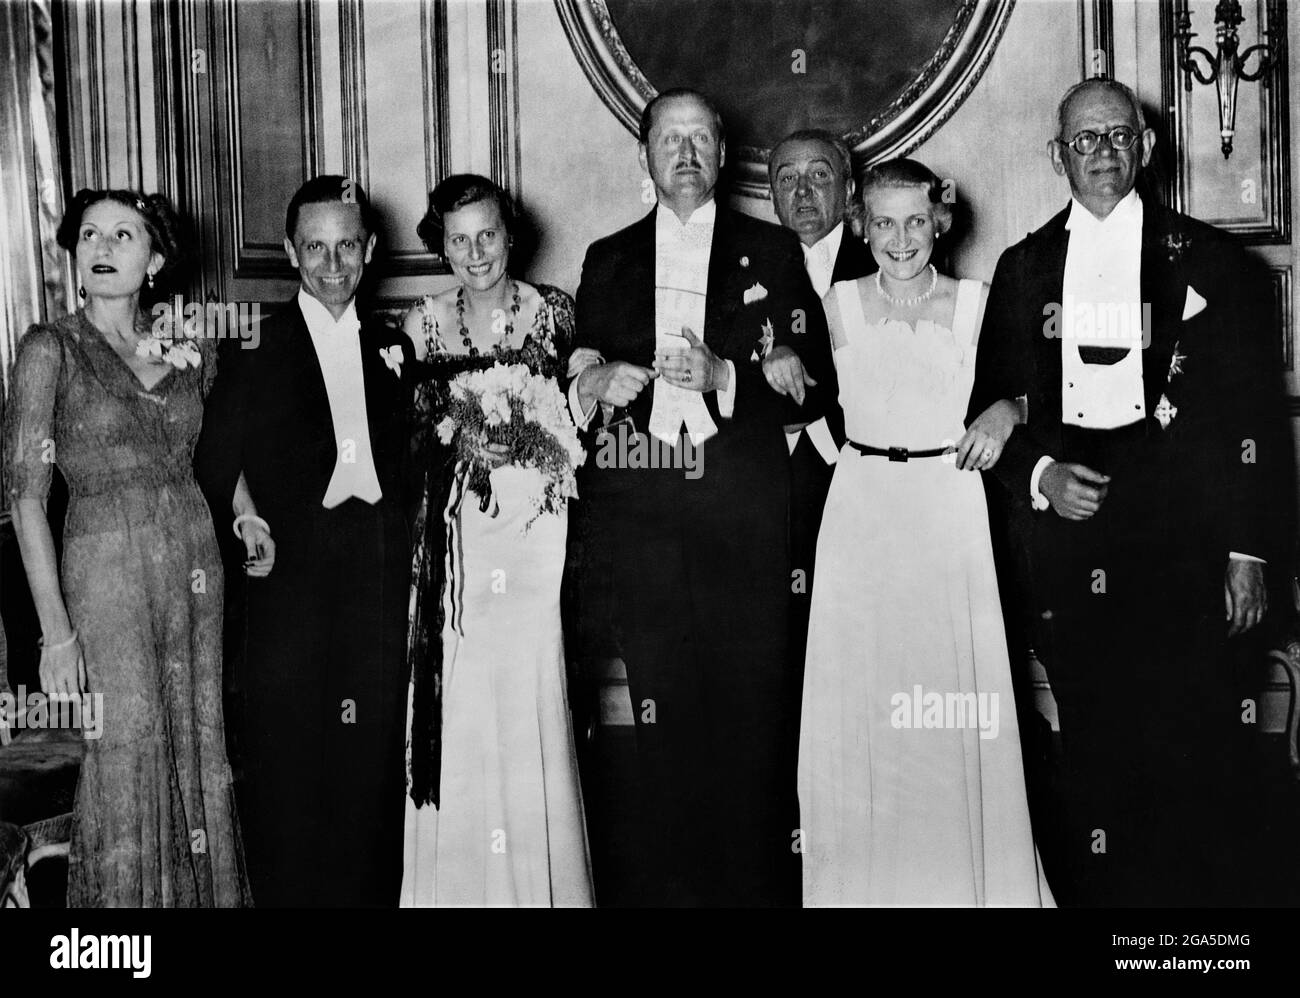 LENI RIEFENSTAHL in June 1936 at the Italian Embassy in Berlin accompanied by Nazi Propaganda Minister JOSEPH GOEBBELS and his Wife receives Italian Award for Best Film for TRIUMPH OF THE WILL / TRIUMPH DES WILLES (released in 1935) from Countess CIANO daughter of Benito Mussolini Stock Photo